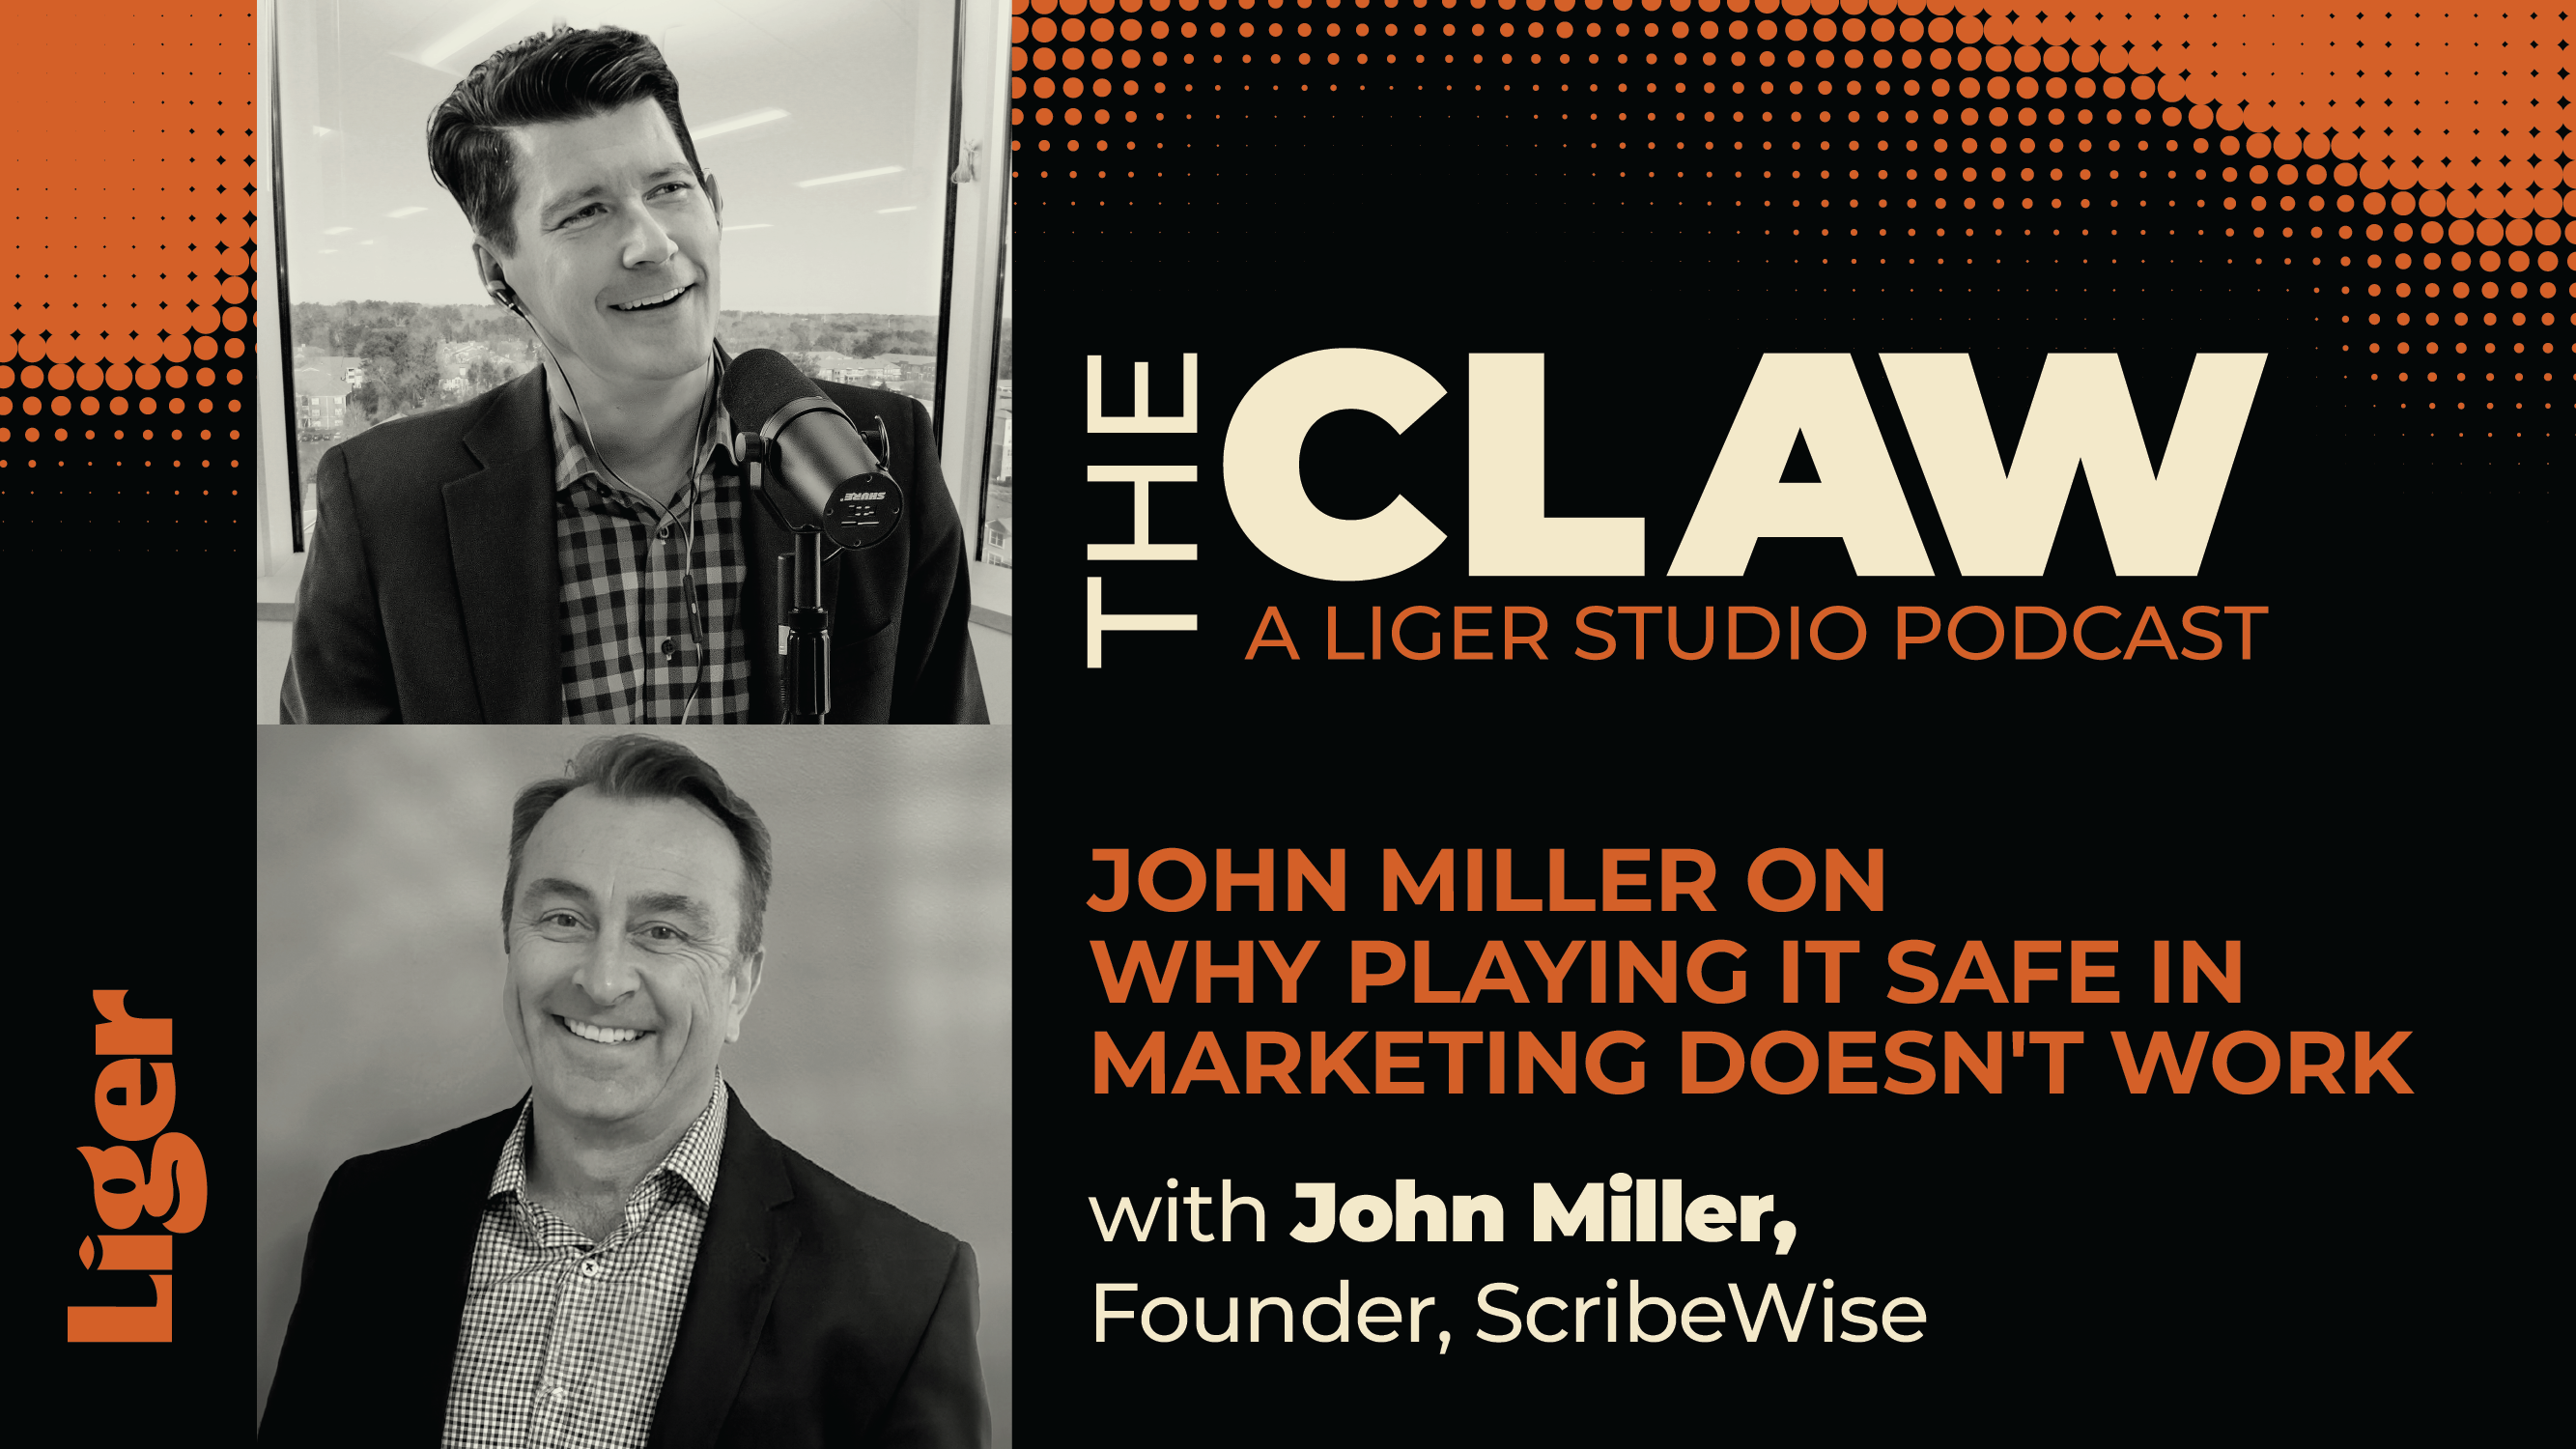 John Miller on Why Playing It Safe in Marketing Doesn’t Work